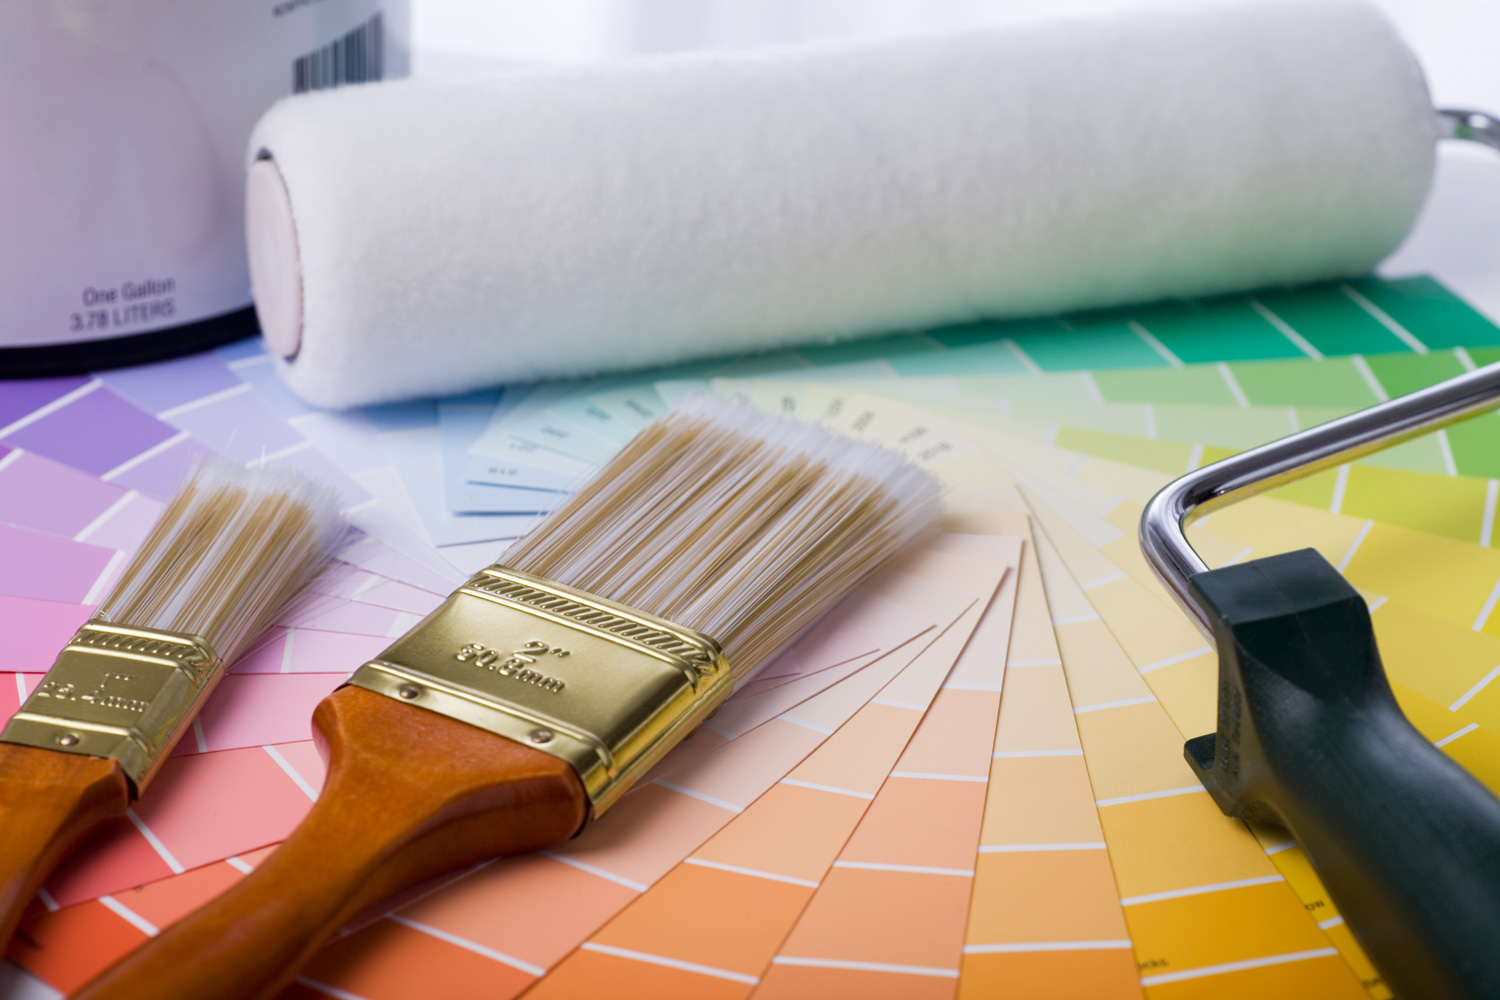 close-up image of paint brushes, roller, paint can, and paint samples